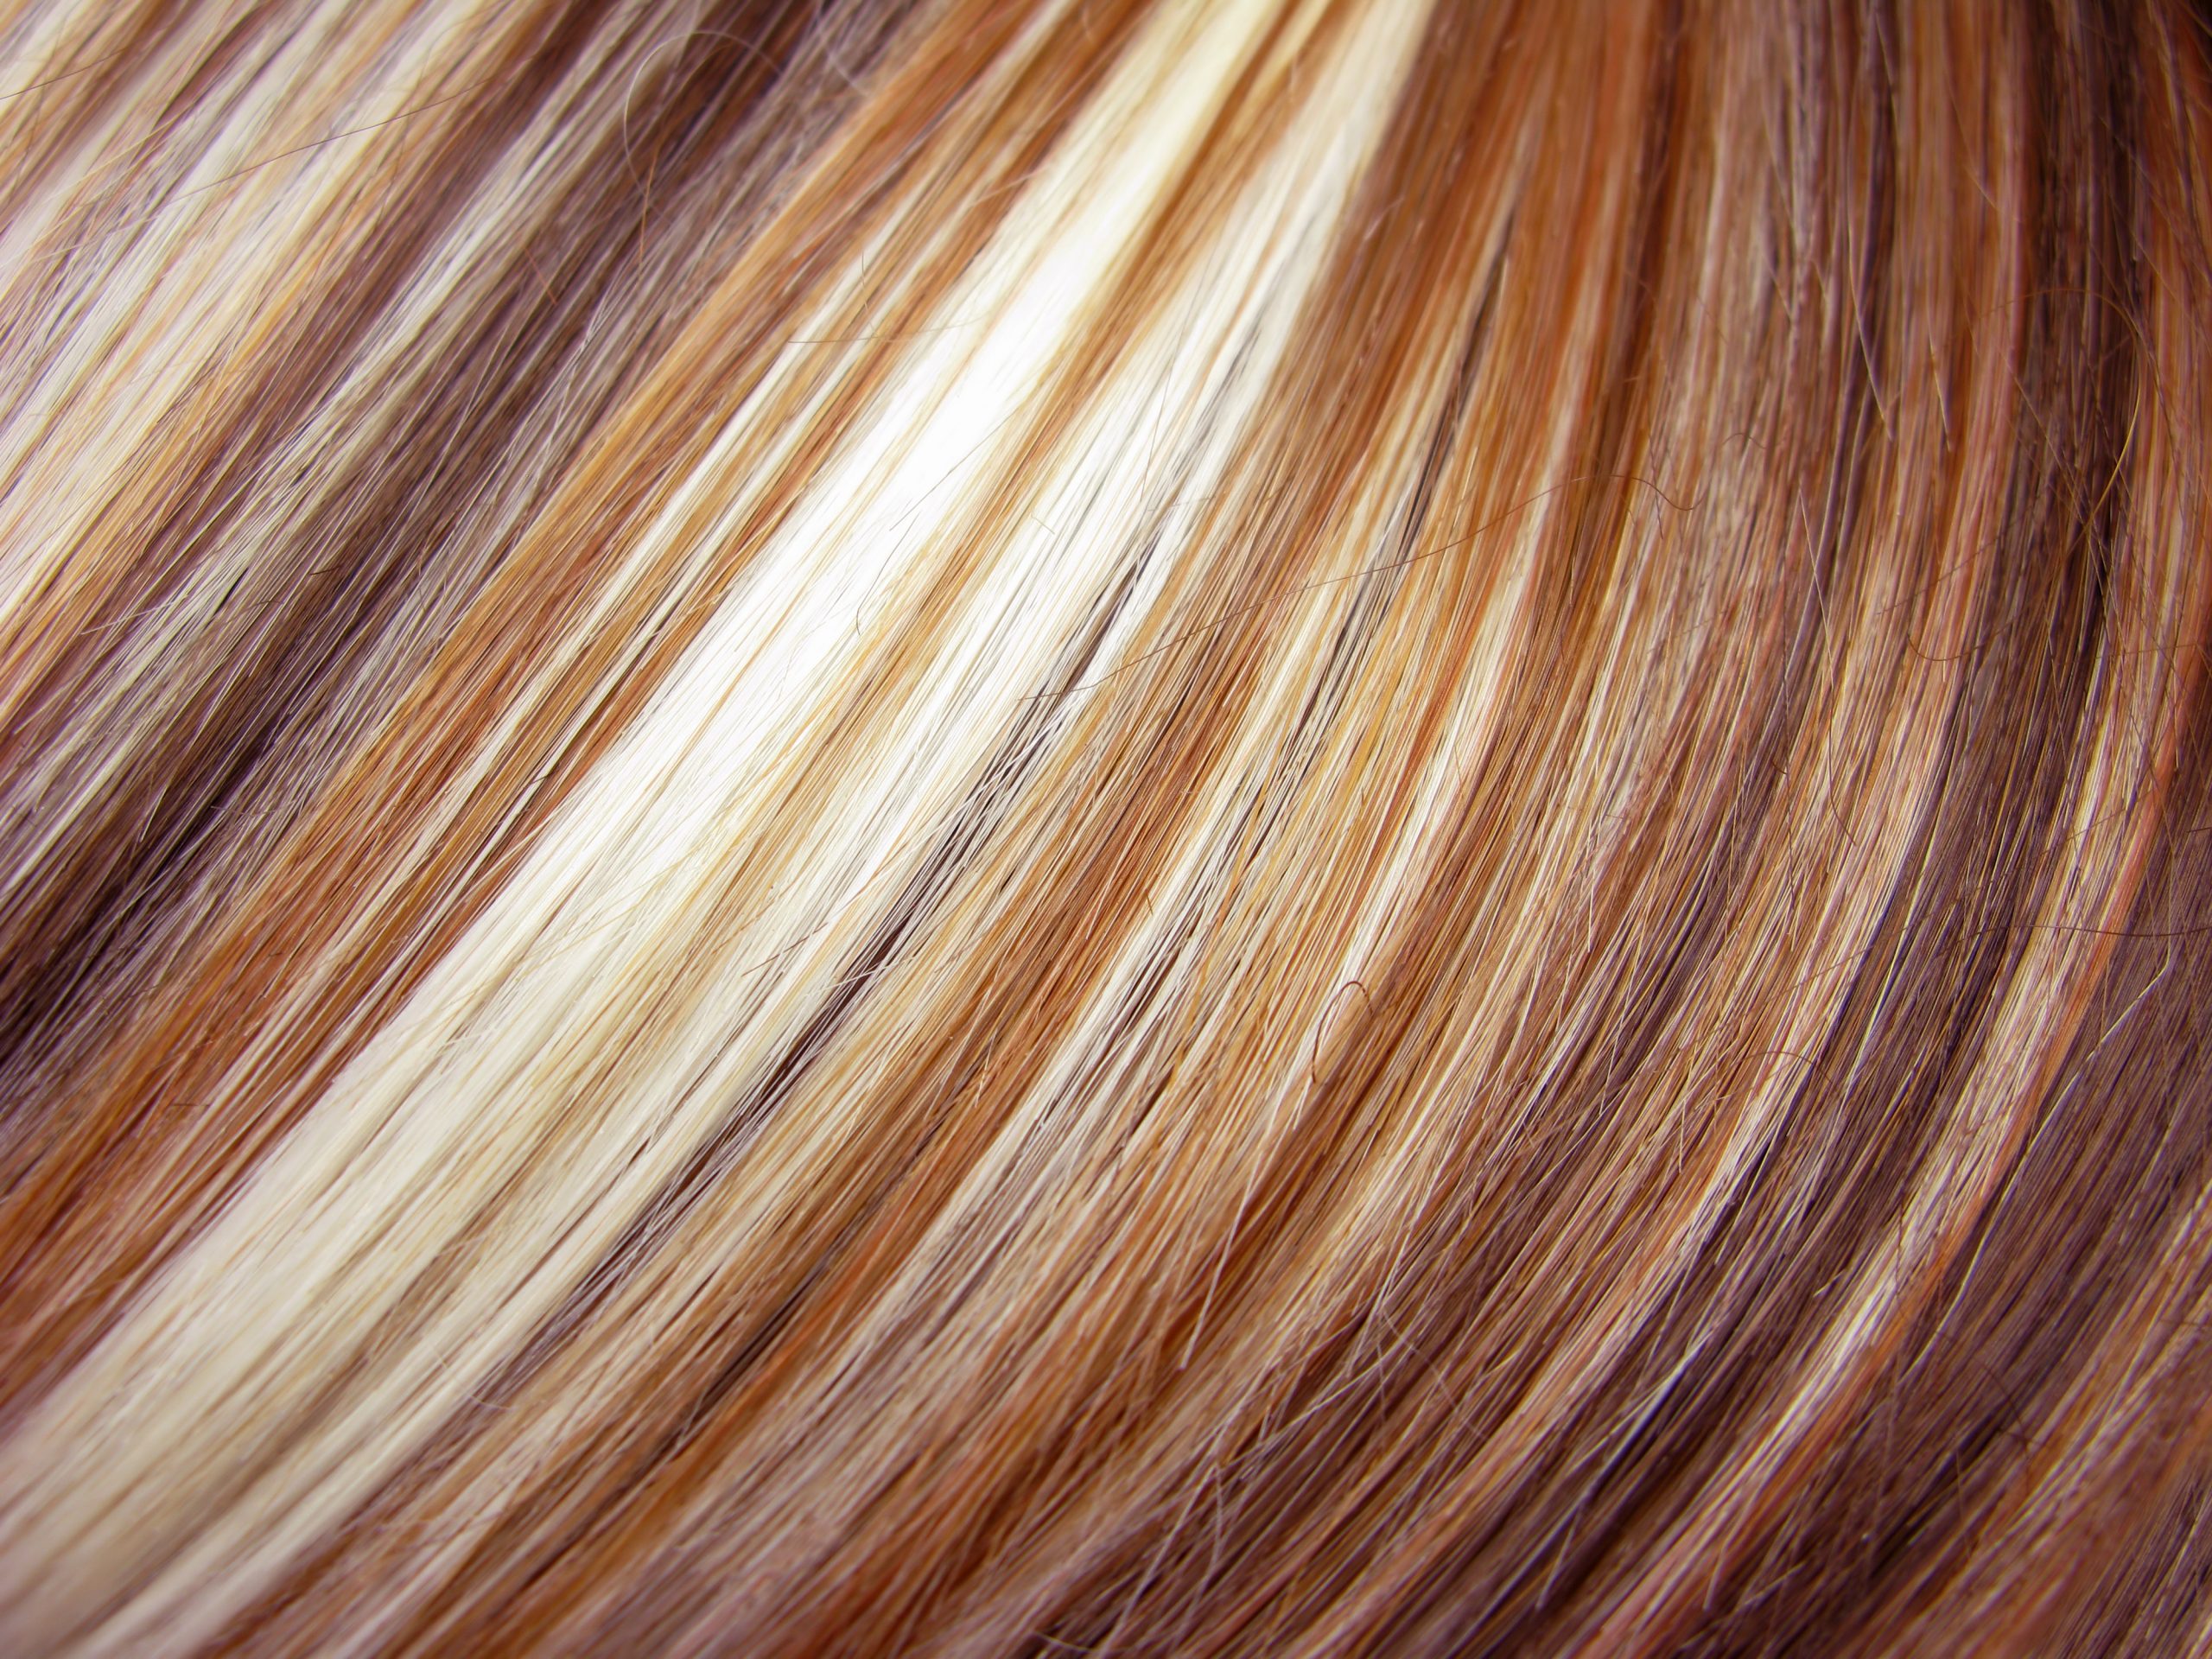 An image of many colors of hair possible at a Bridal Veil hair color salon